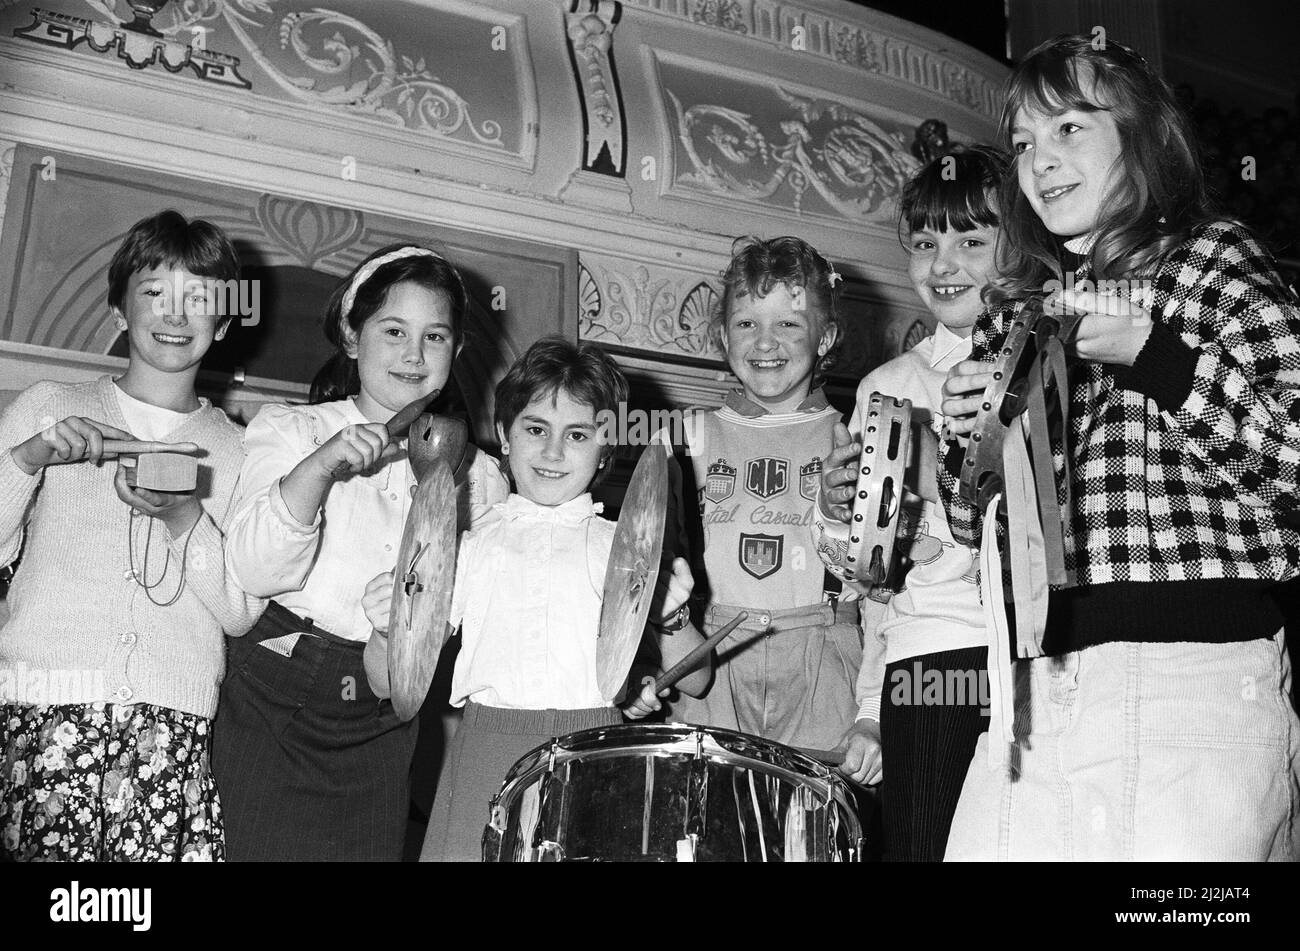 The Cowersley Junior School percussionists, from left, Alison Sykes, Antonia Tweed, Kirsty Gentry, Jill Irving, Lindsay Ashcroft and Carole Pollard, during the Kirklees Primary School Music festival at Huddersfield Town Hall. 23rd March 1988. Stock Photo